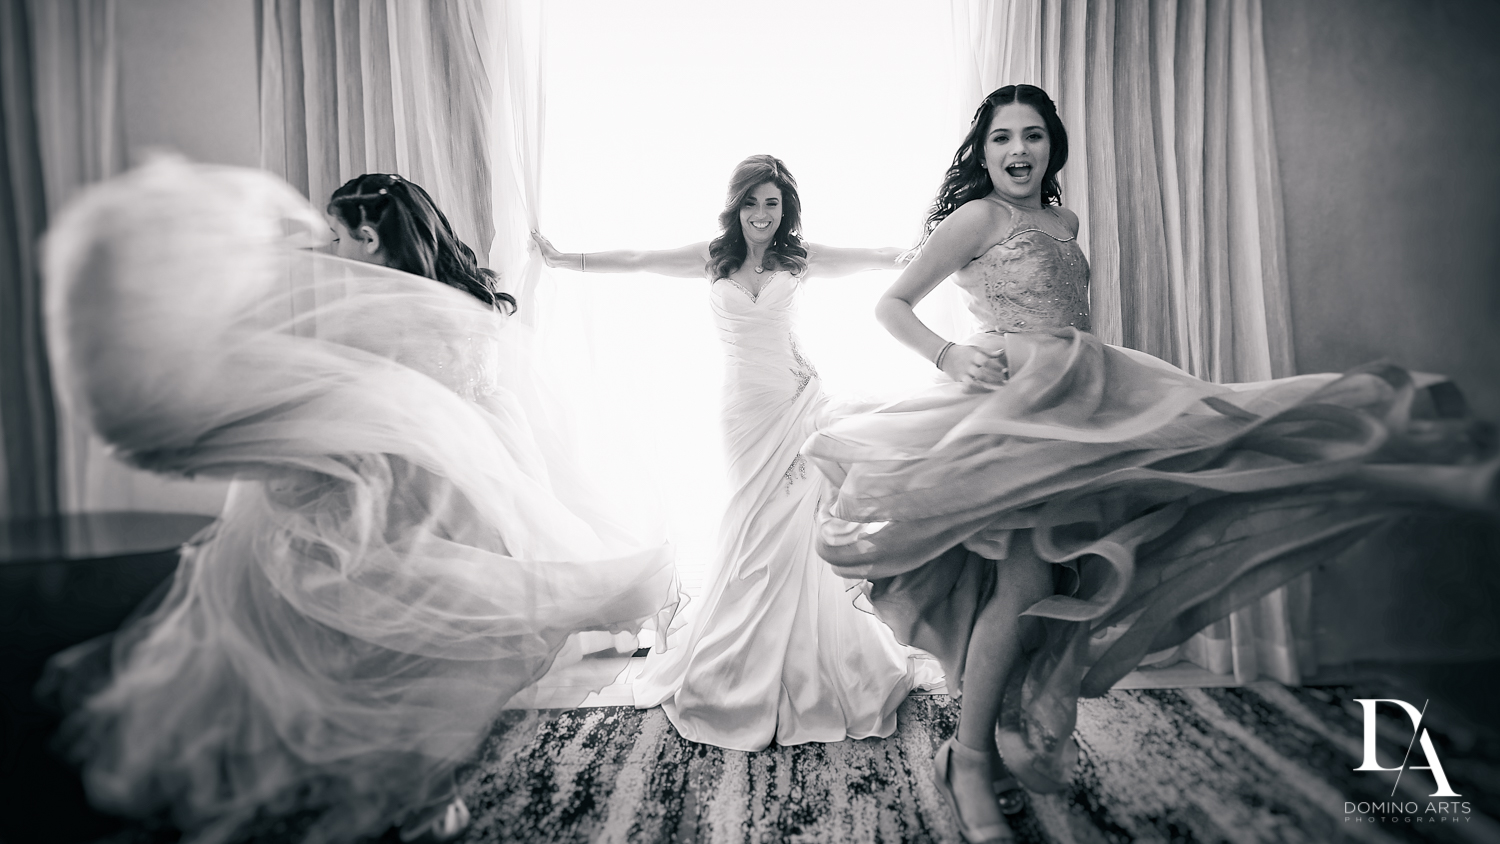 Girls having fun at Wedding Photography in South Florida at Fort Lauderdale Marriott Harbor Beach Resort & Spa by Domino Arts Photography